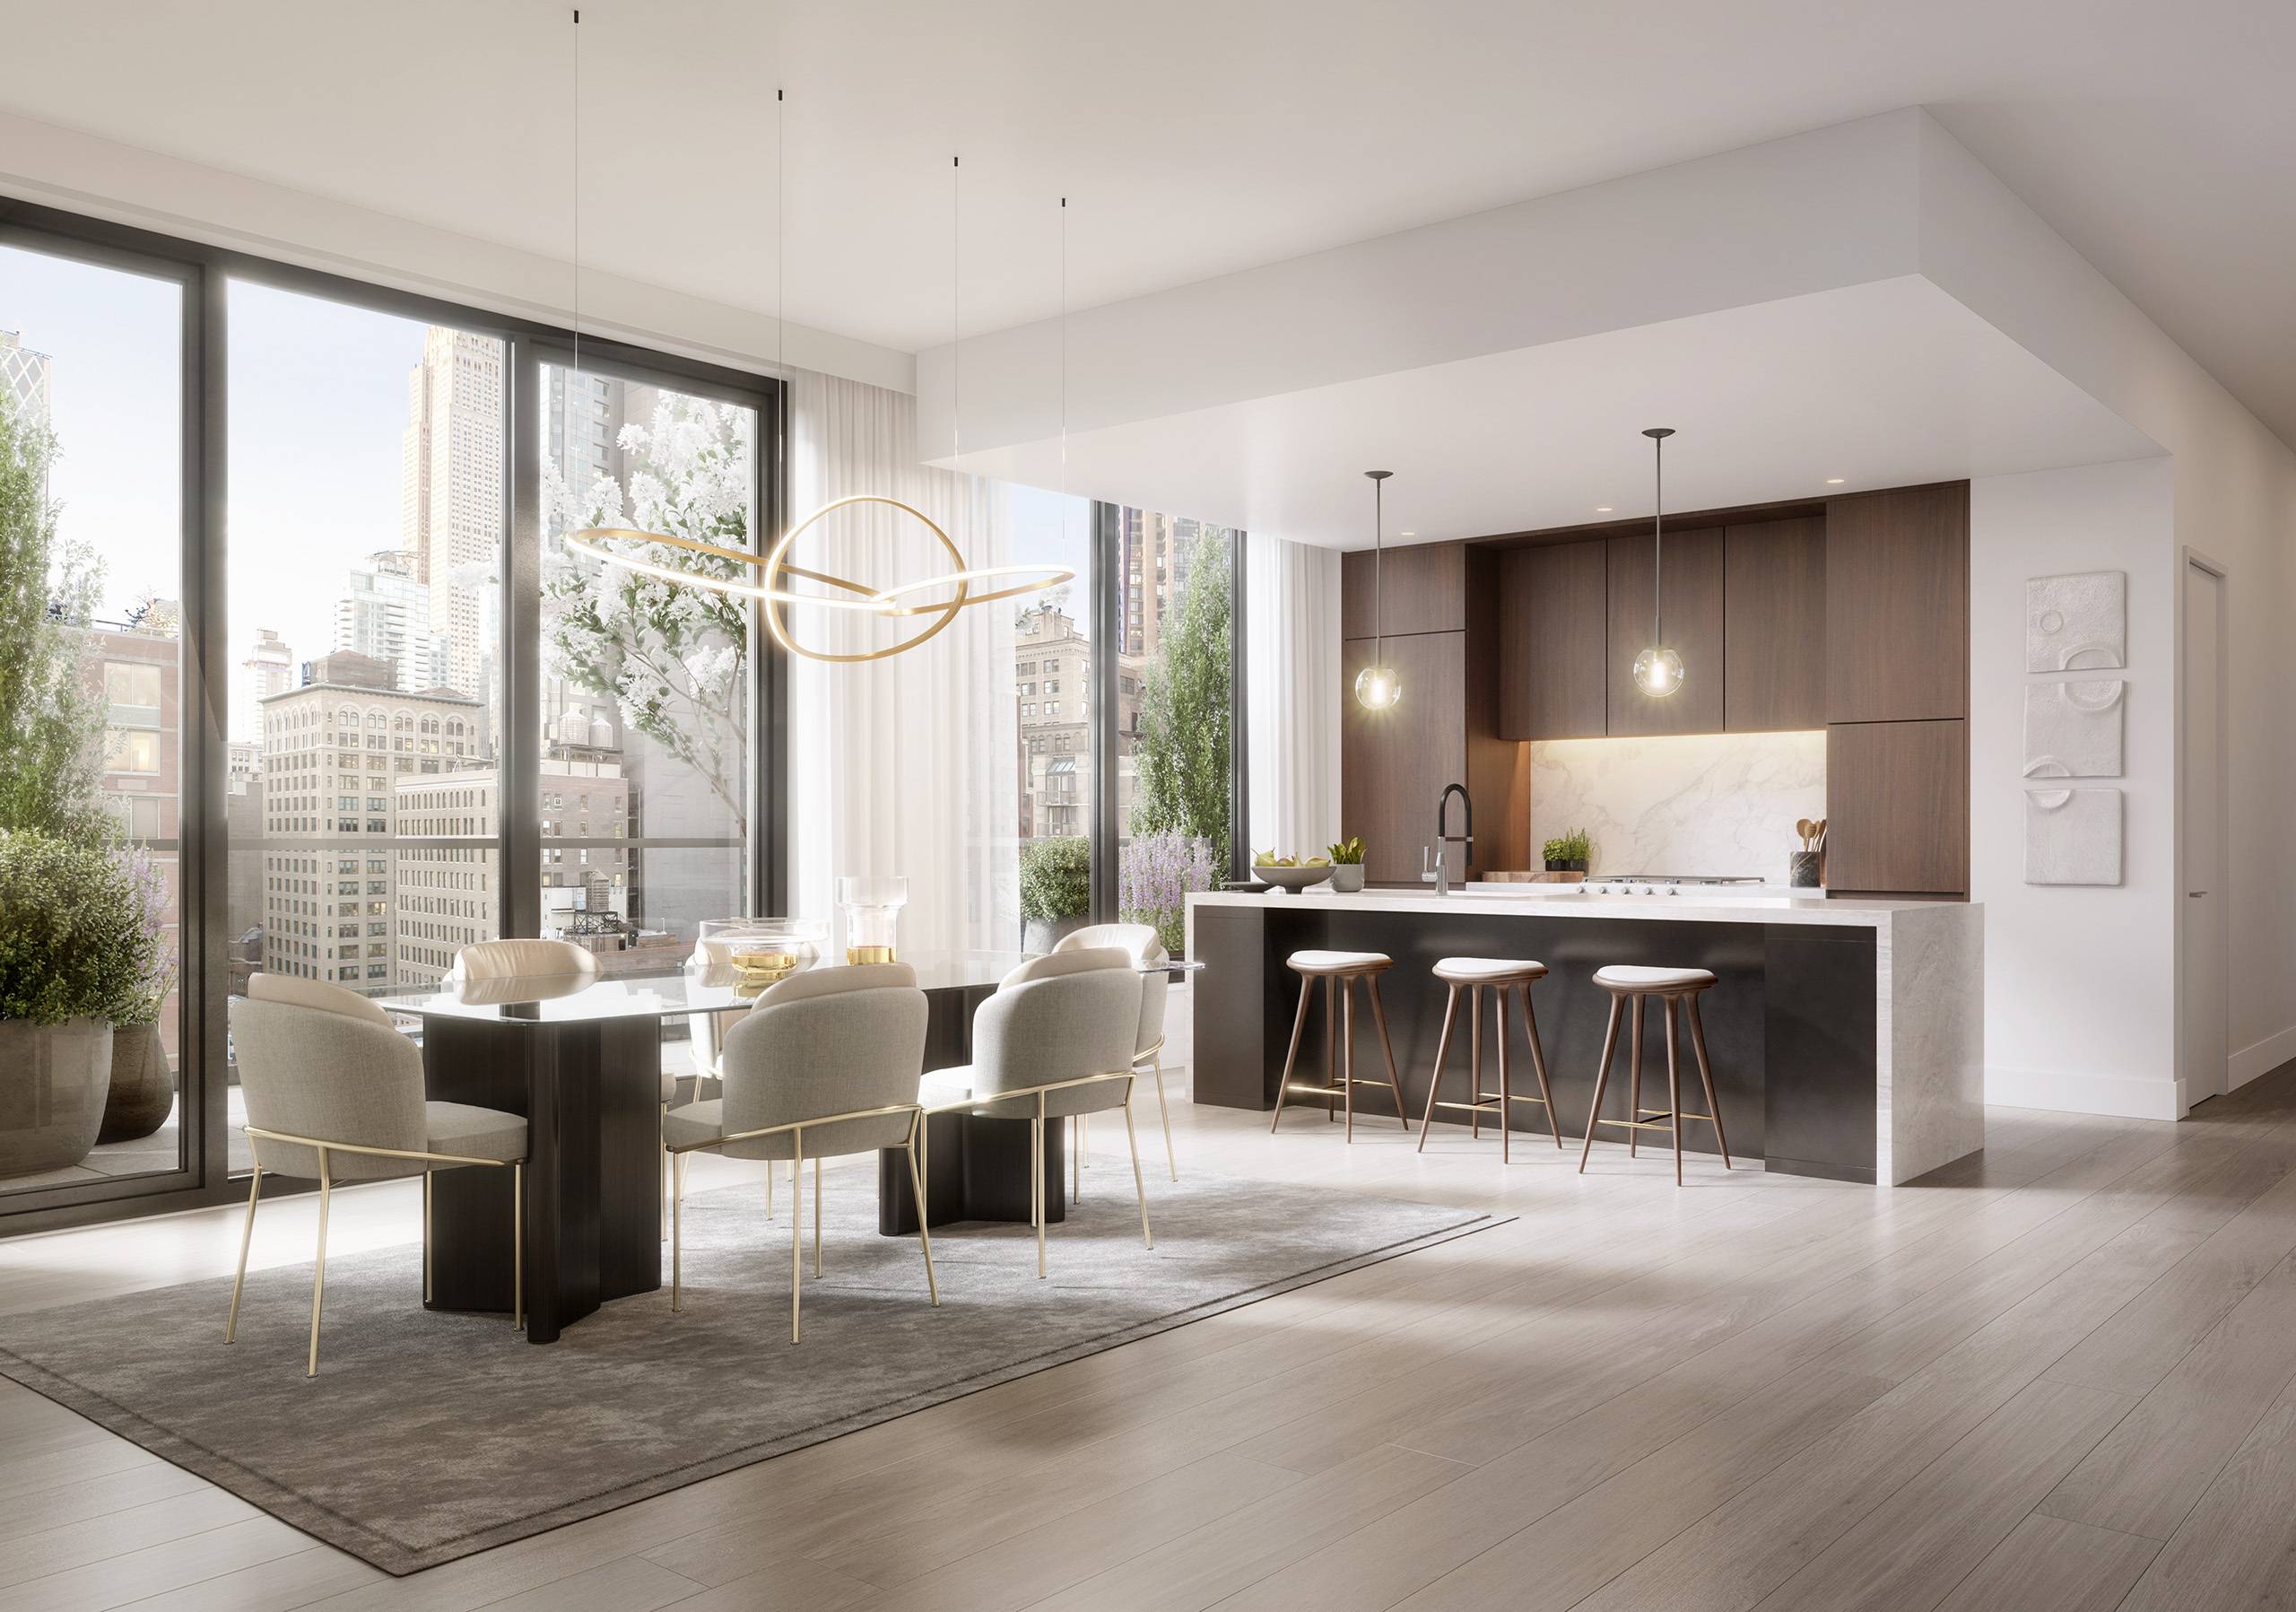 IMMEDIATE OCCUPANCY A brand new Kips Bay condo with a private balcony and an abundance of natural light, this inviting 1 bedroom, 1 bathroom home is an effortless blend of ...